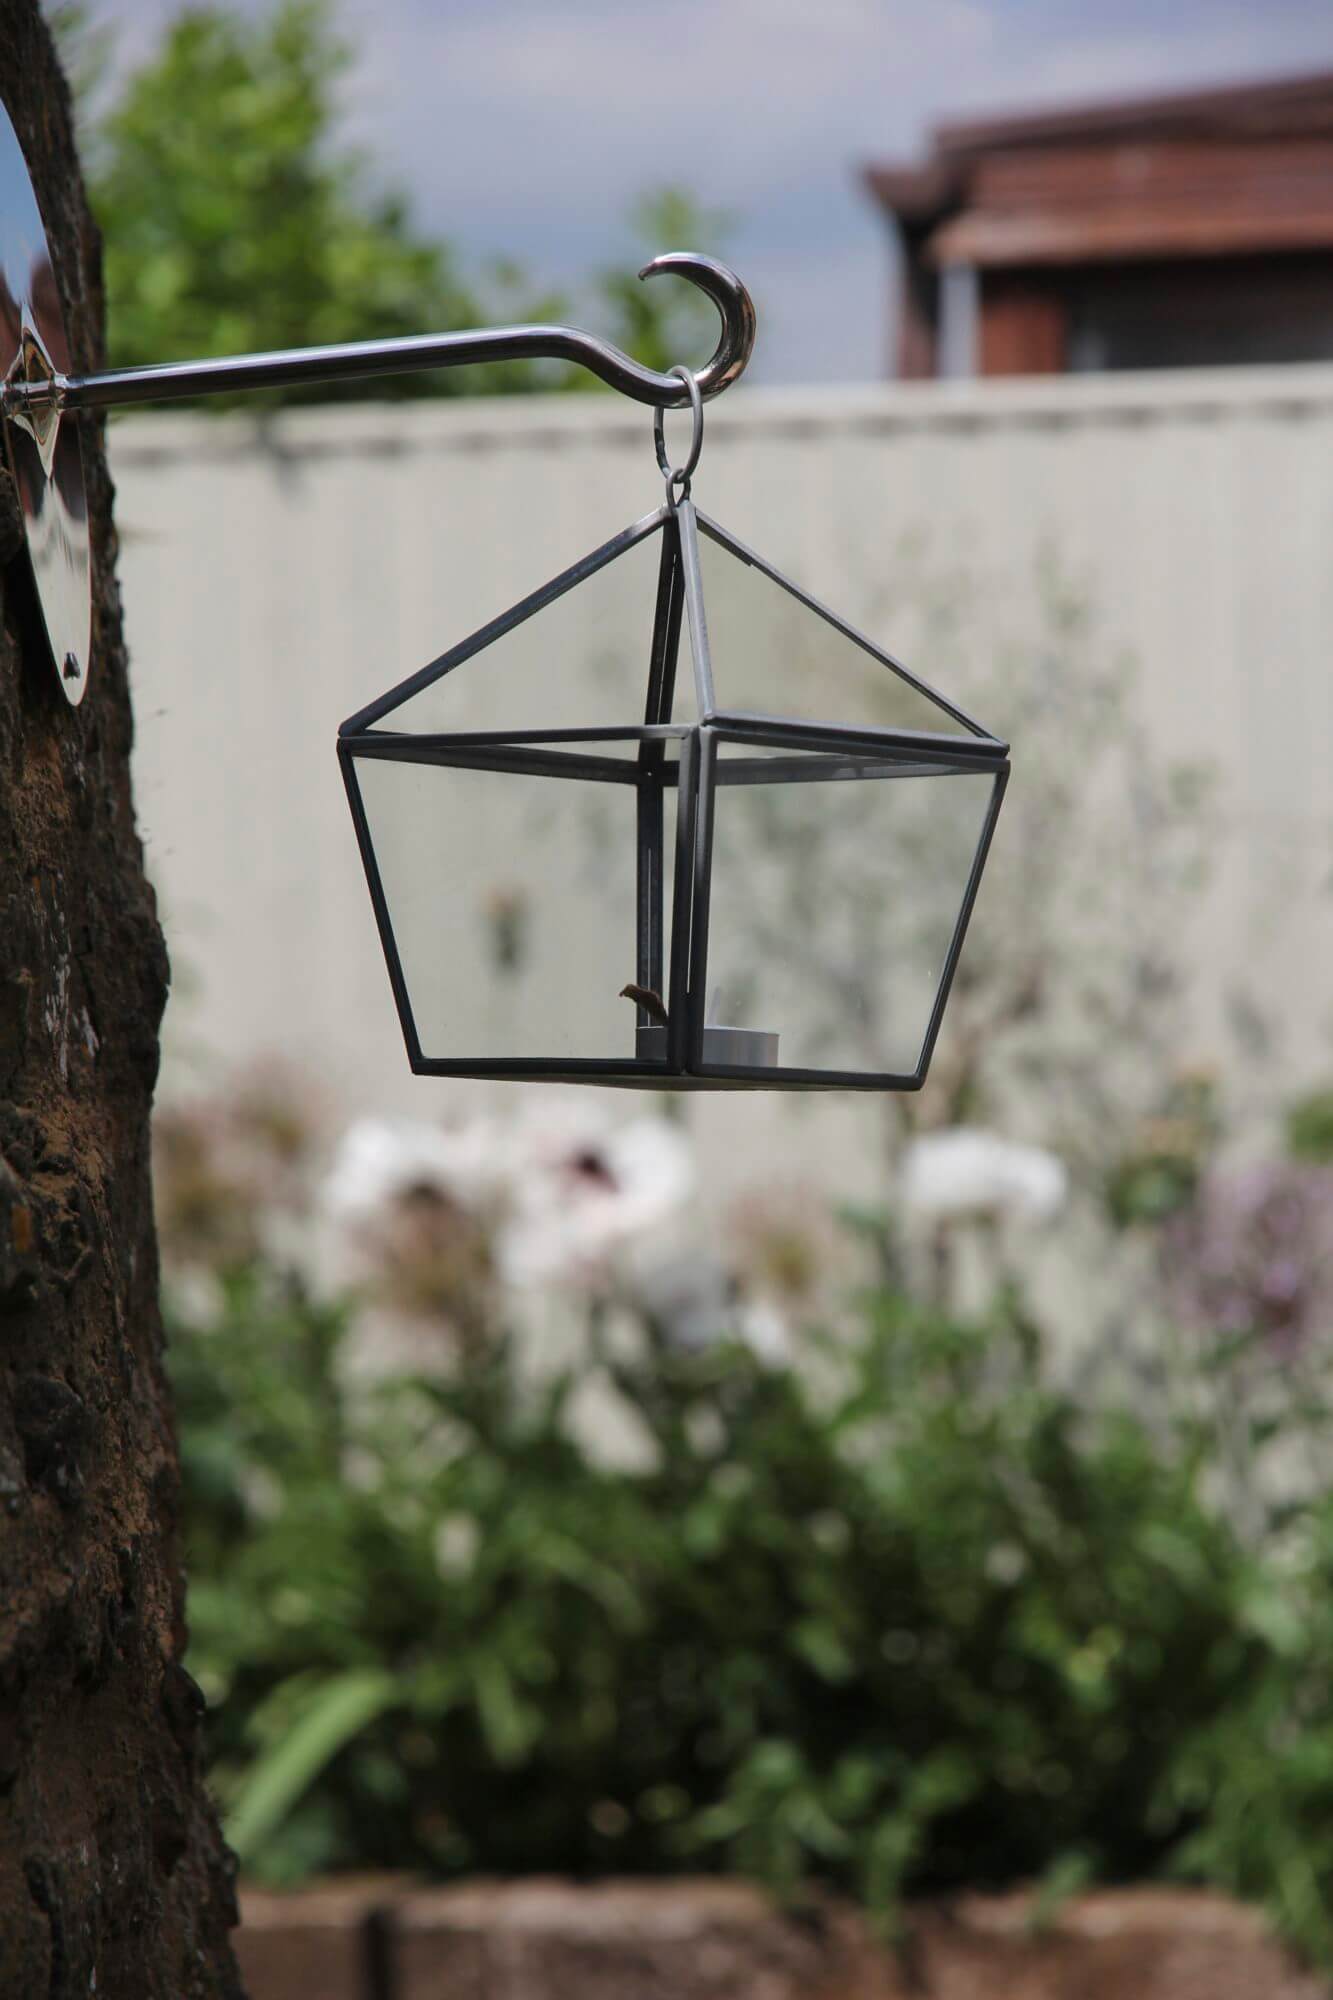 Hexagonal latern hanging from a chrome silver hook in tree